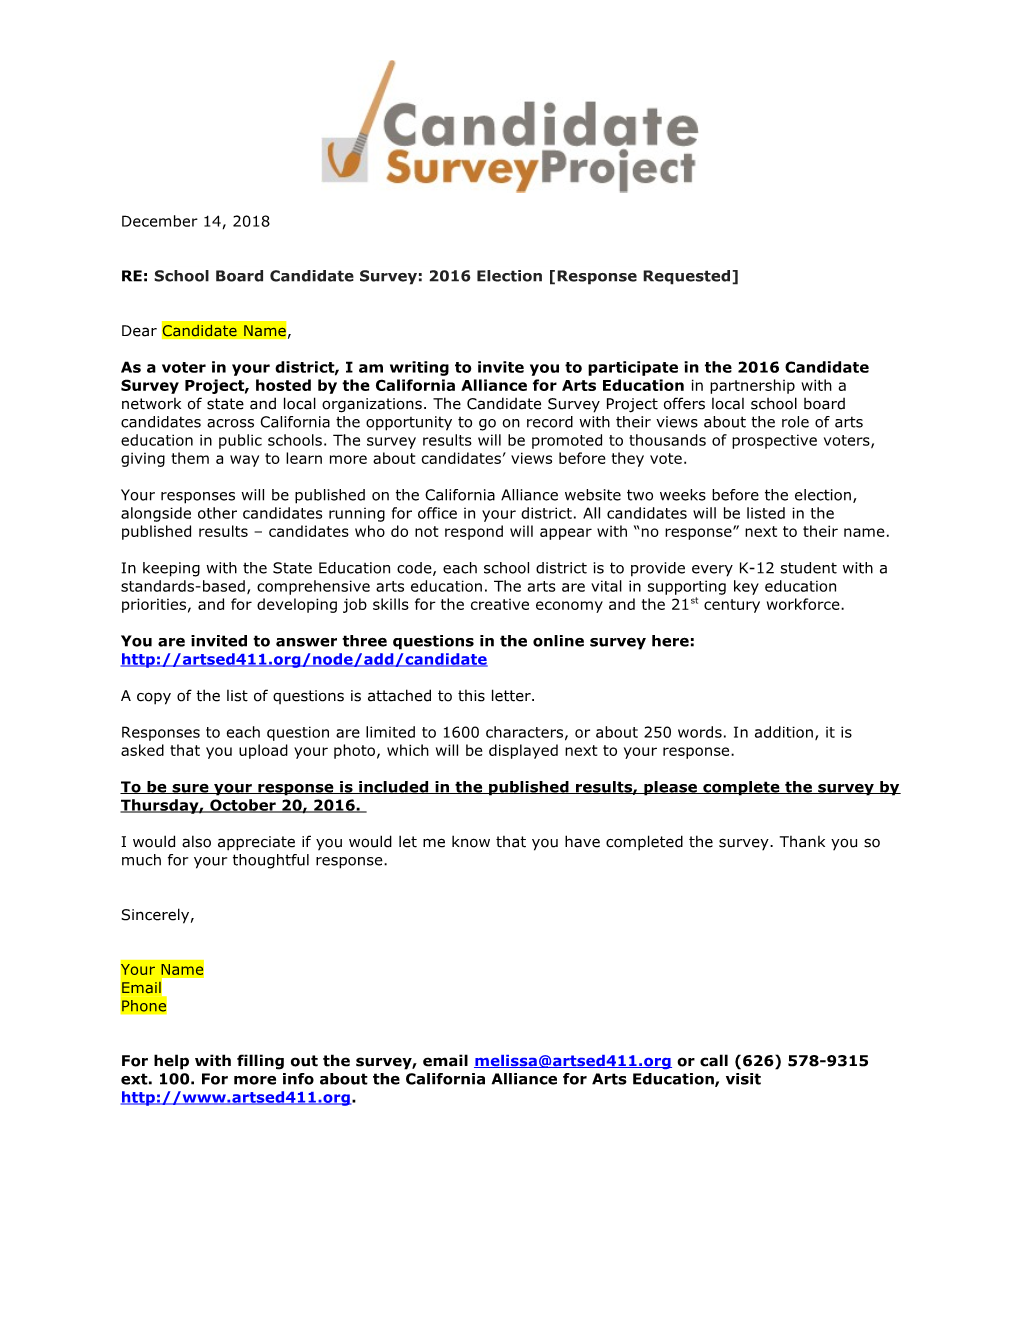 RE: School Board Candidate Survey: 2016 Election Response Requested